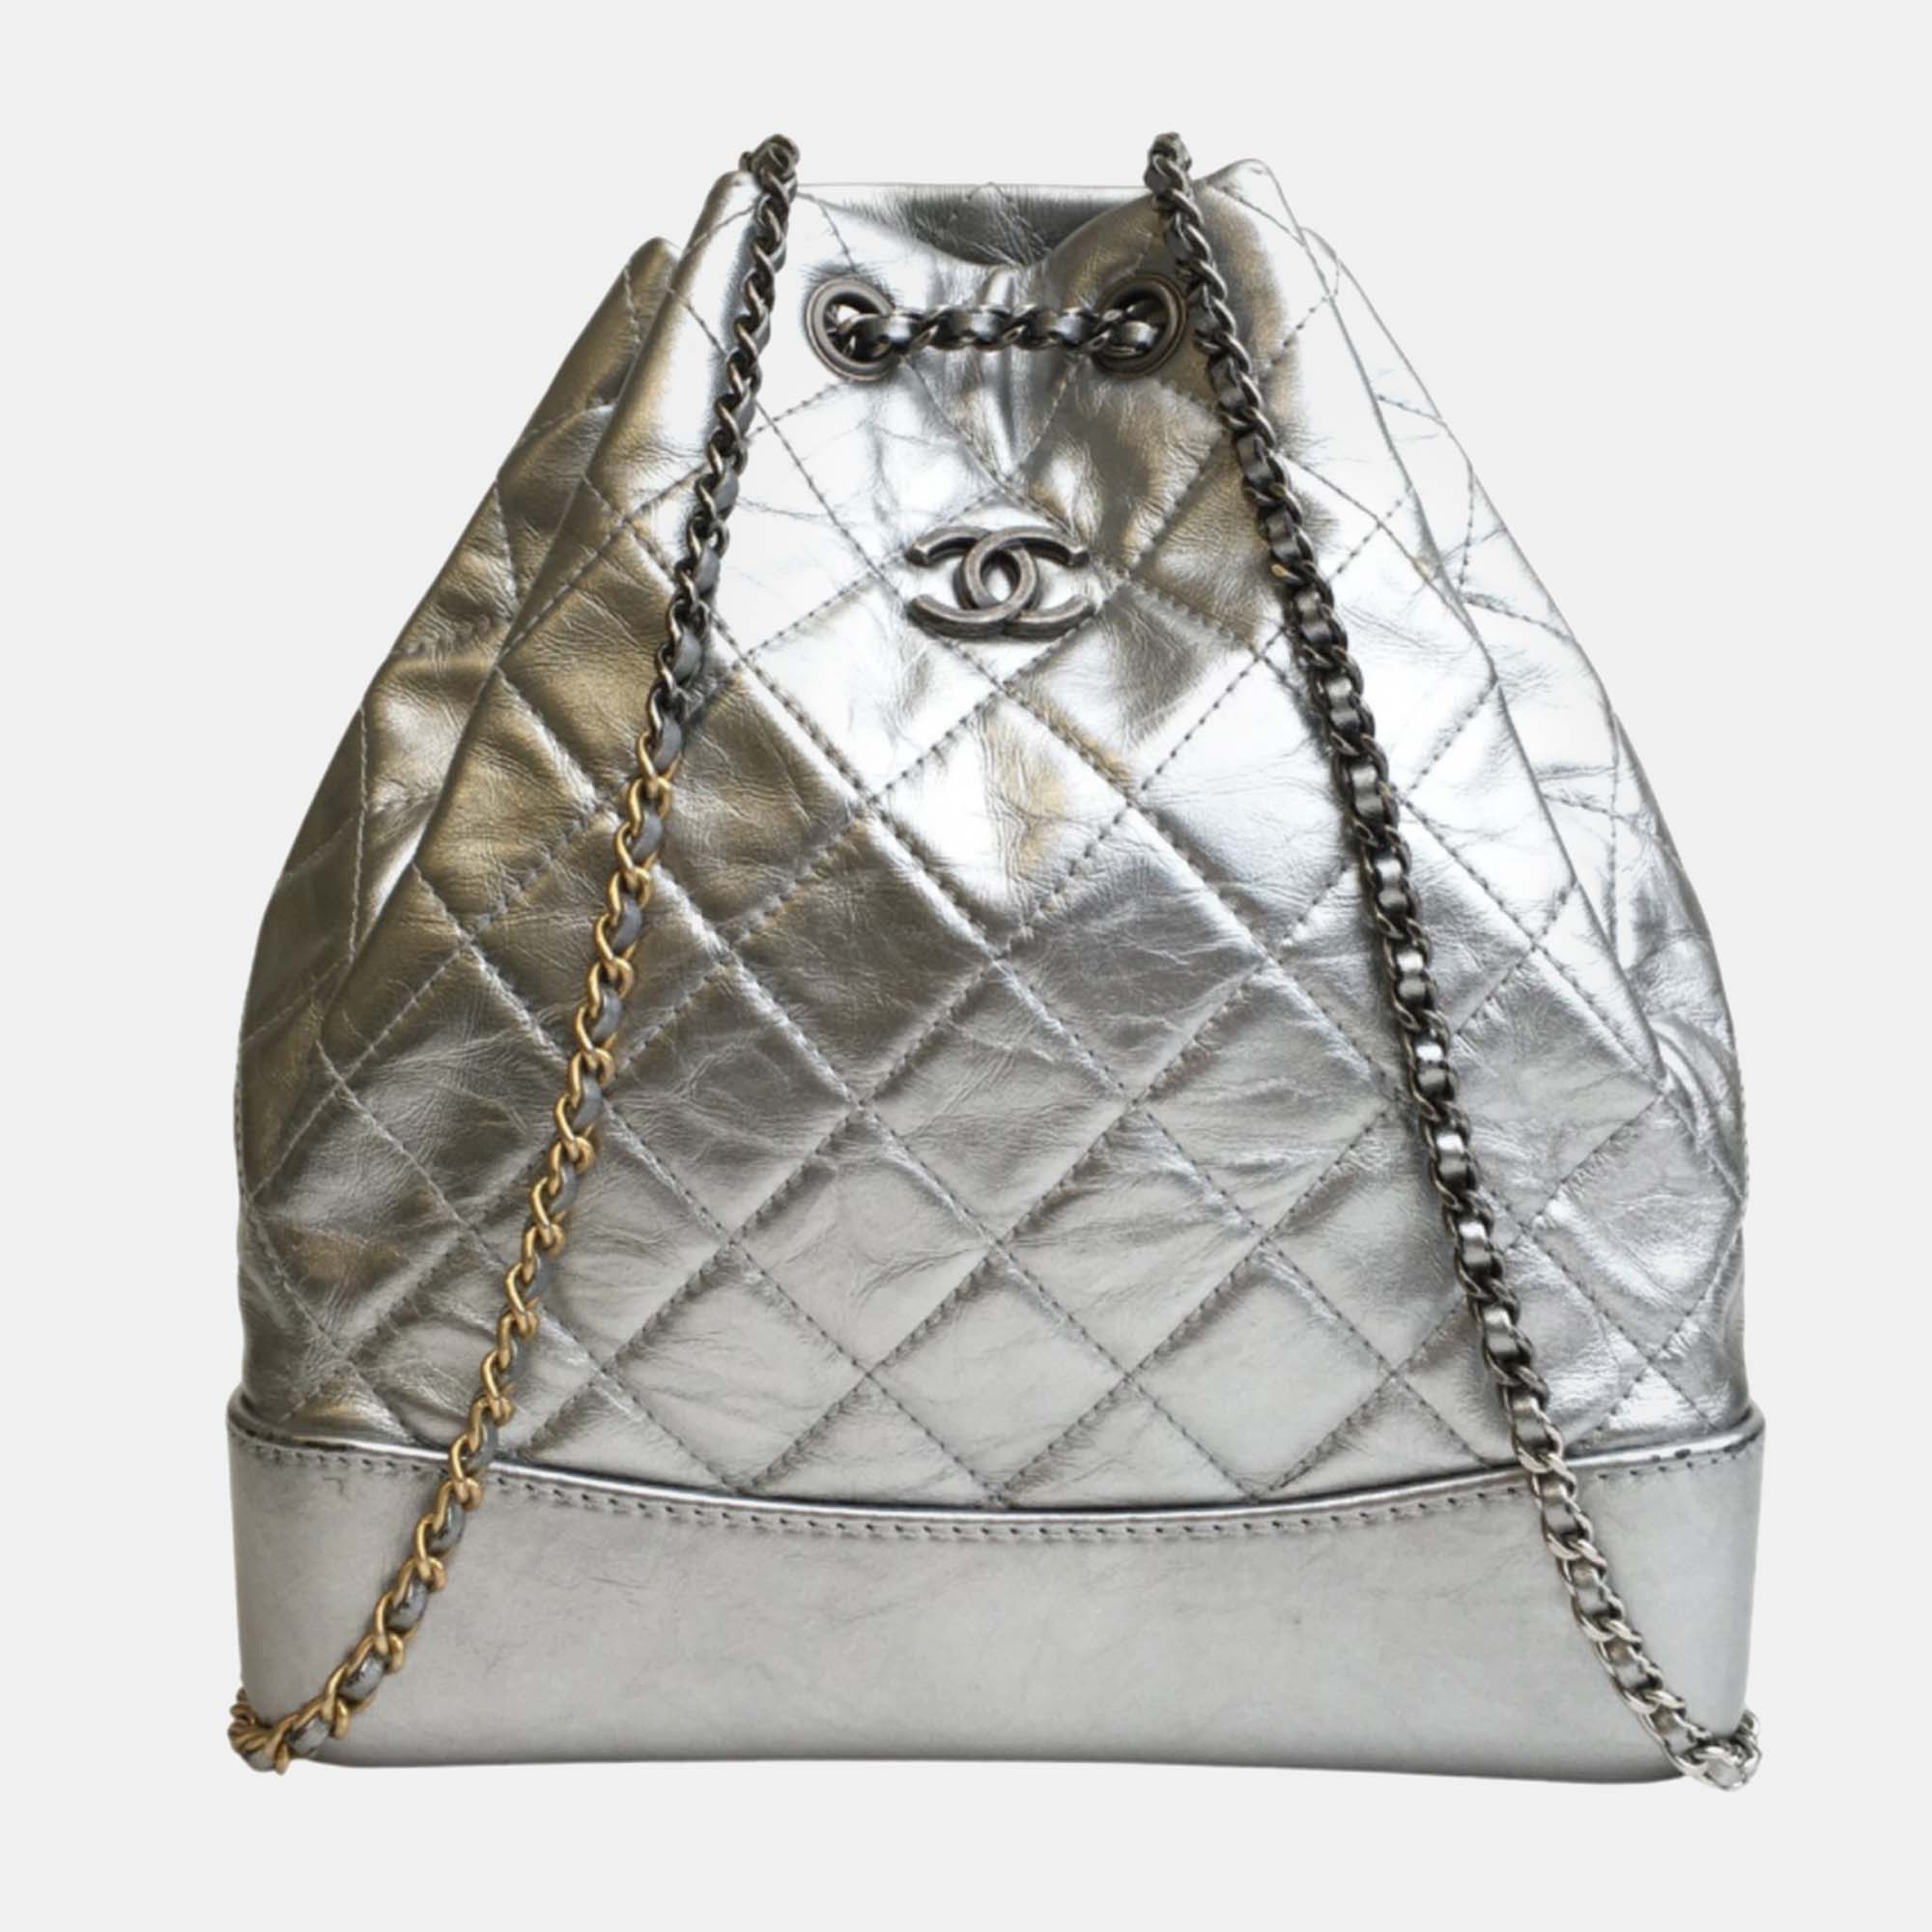 Chanel silver leather gabrielle backpacks